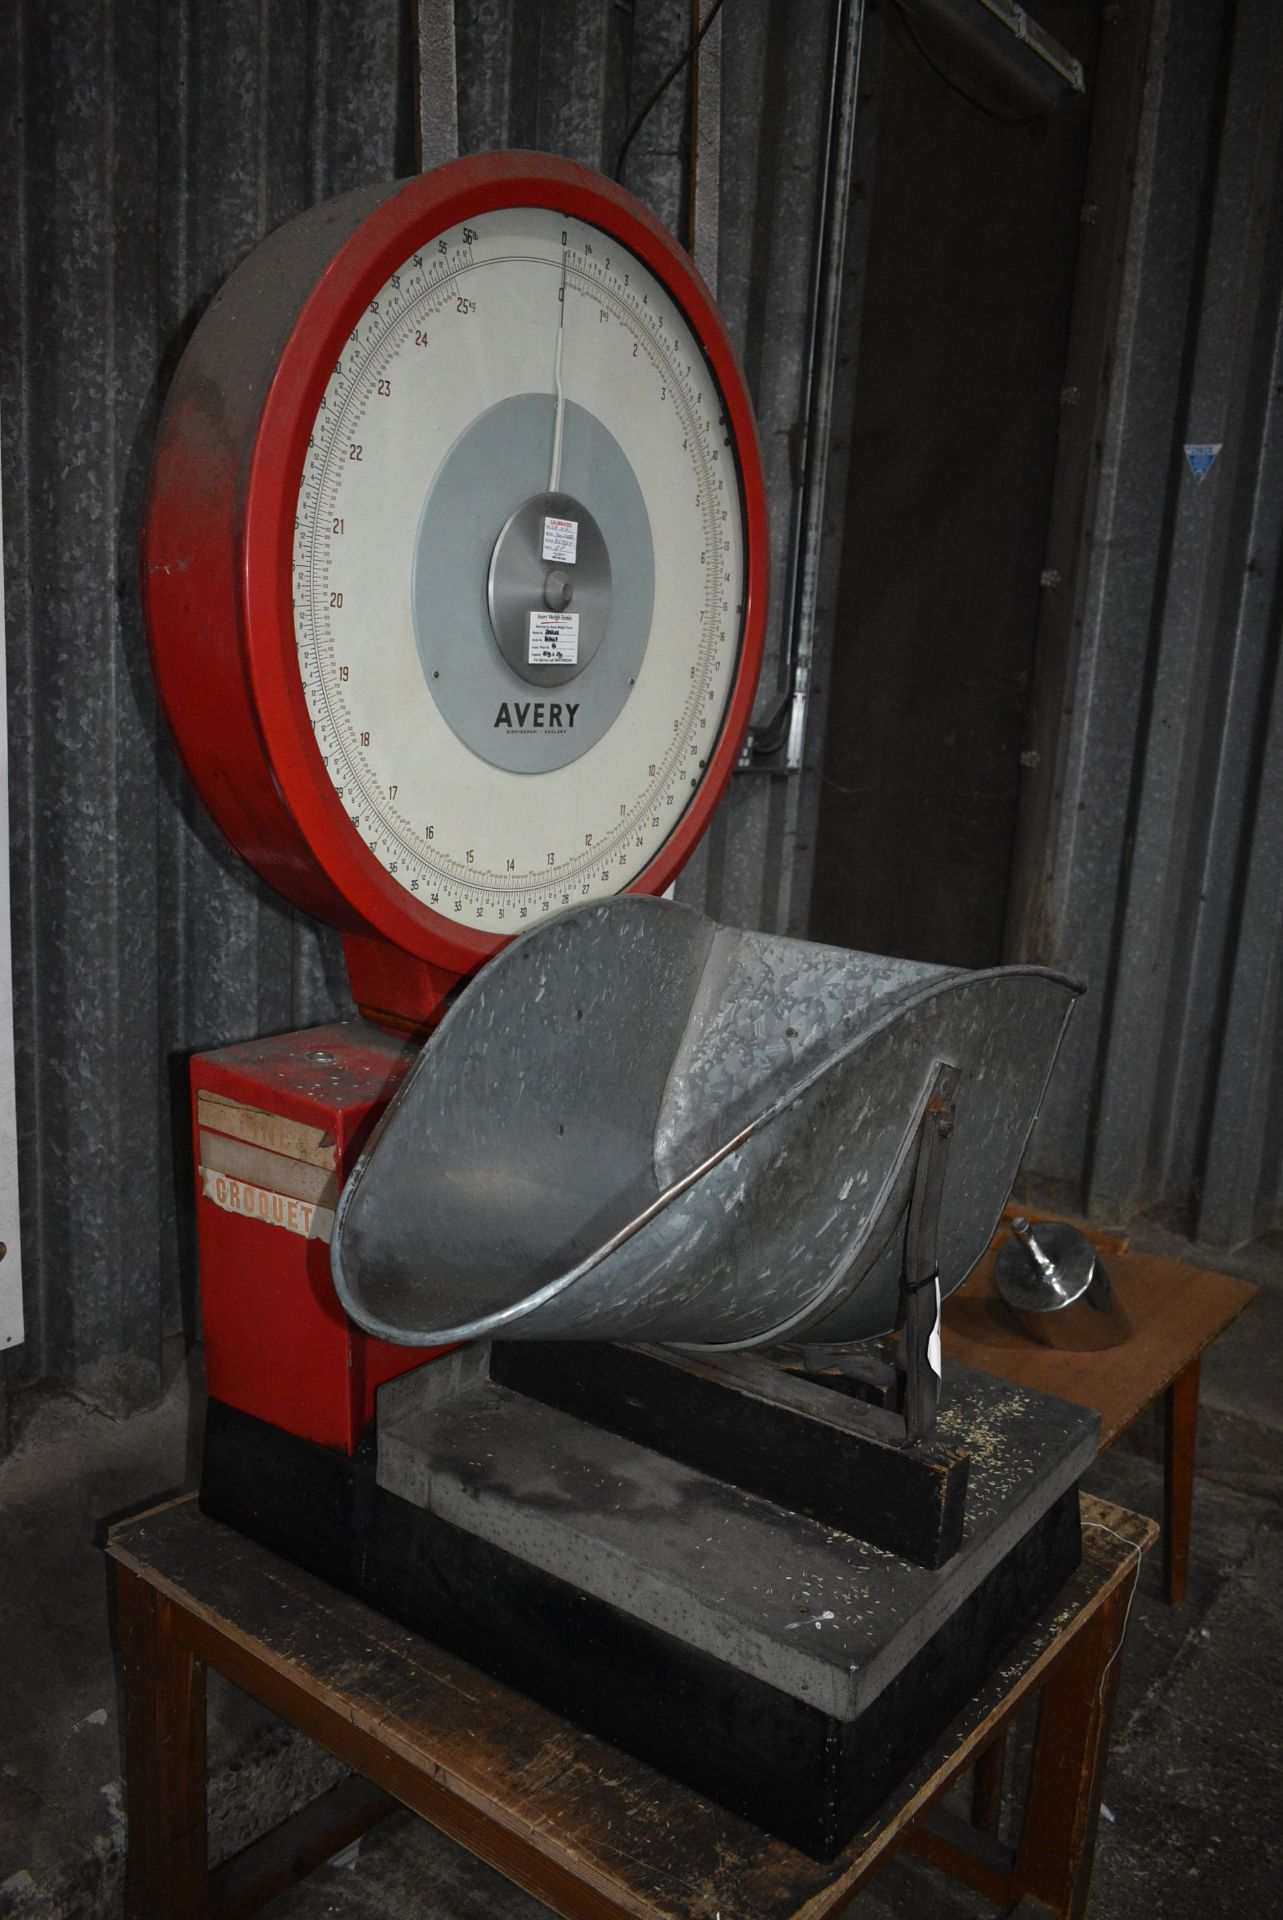 Avery 3303COS 25kg Dial Indicating Bench Weighing - Image 2 of 4